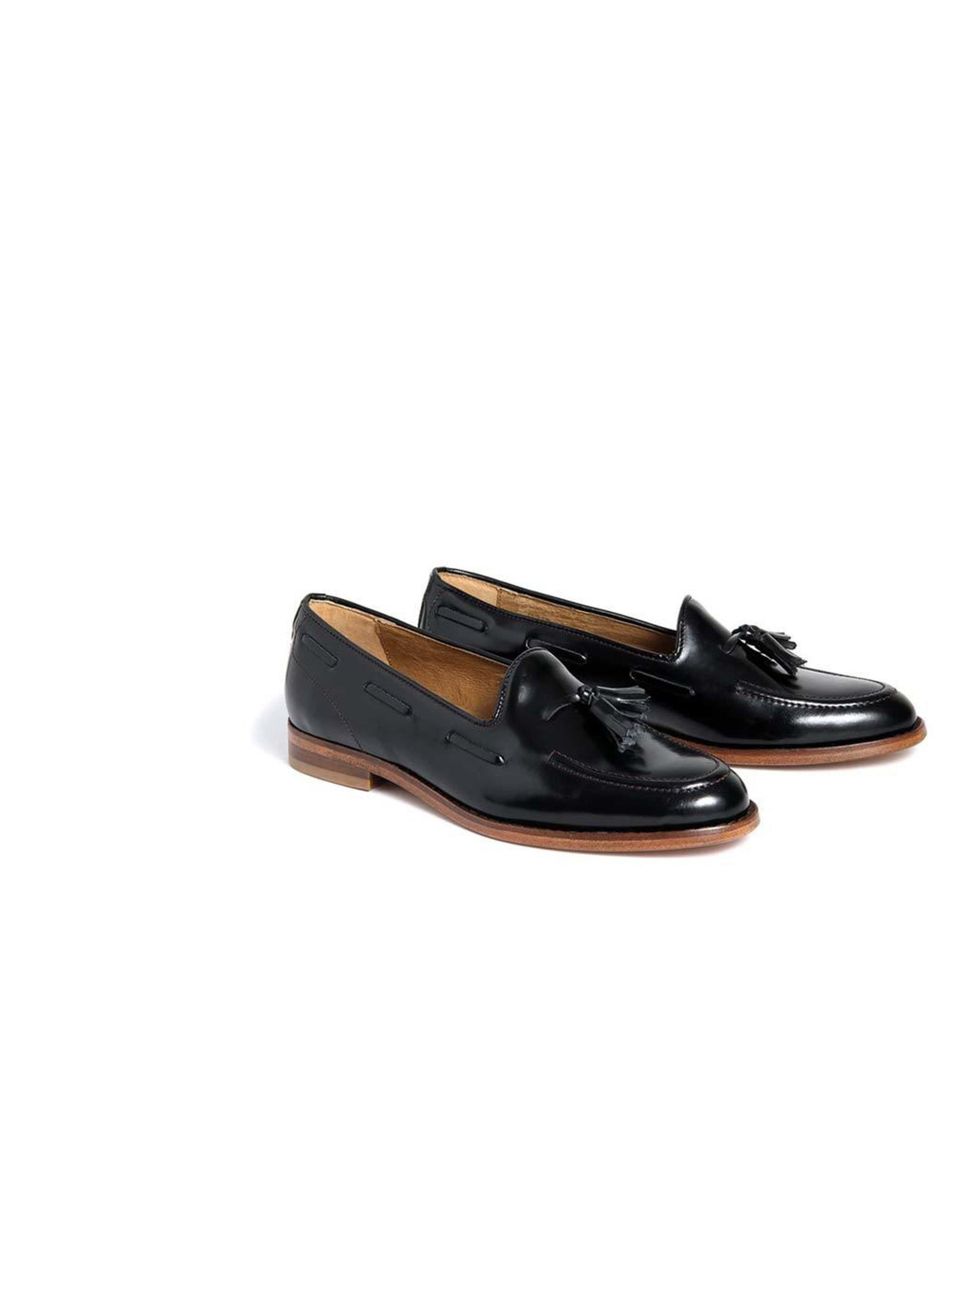 <p>Fashion Assistant Molly Haylor will channel her inner academic in these classic loafers.</p><p><a href="http://www.hudsonshoes.com/stanford-black.html">H by Hudson</a> loafers, £130</p>